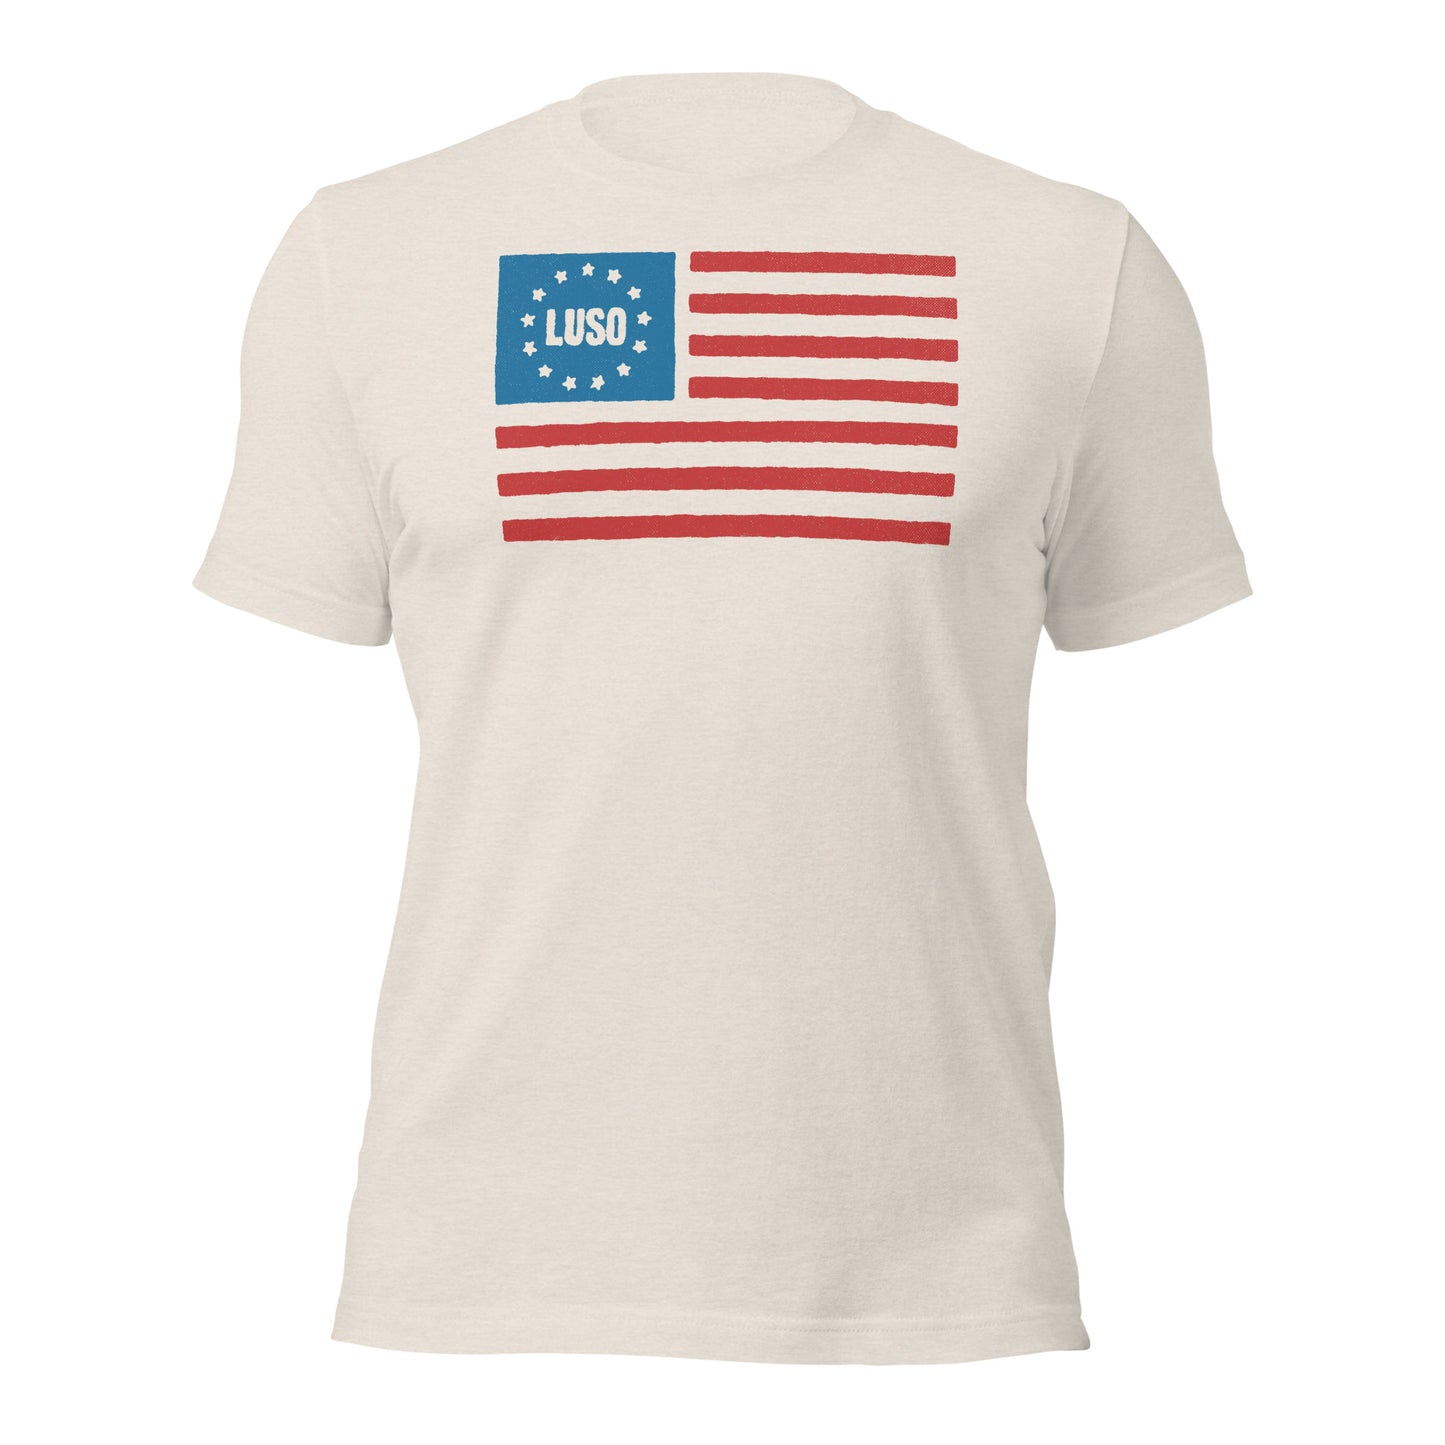 LUSO Betsy Ross Flag Tee